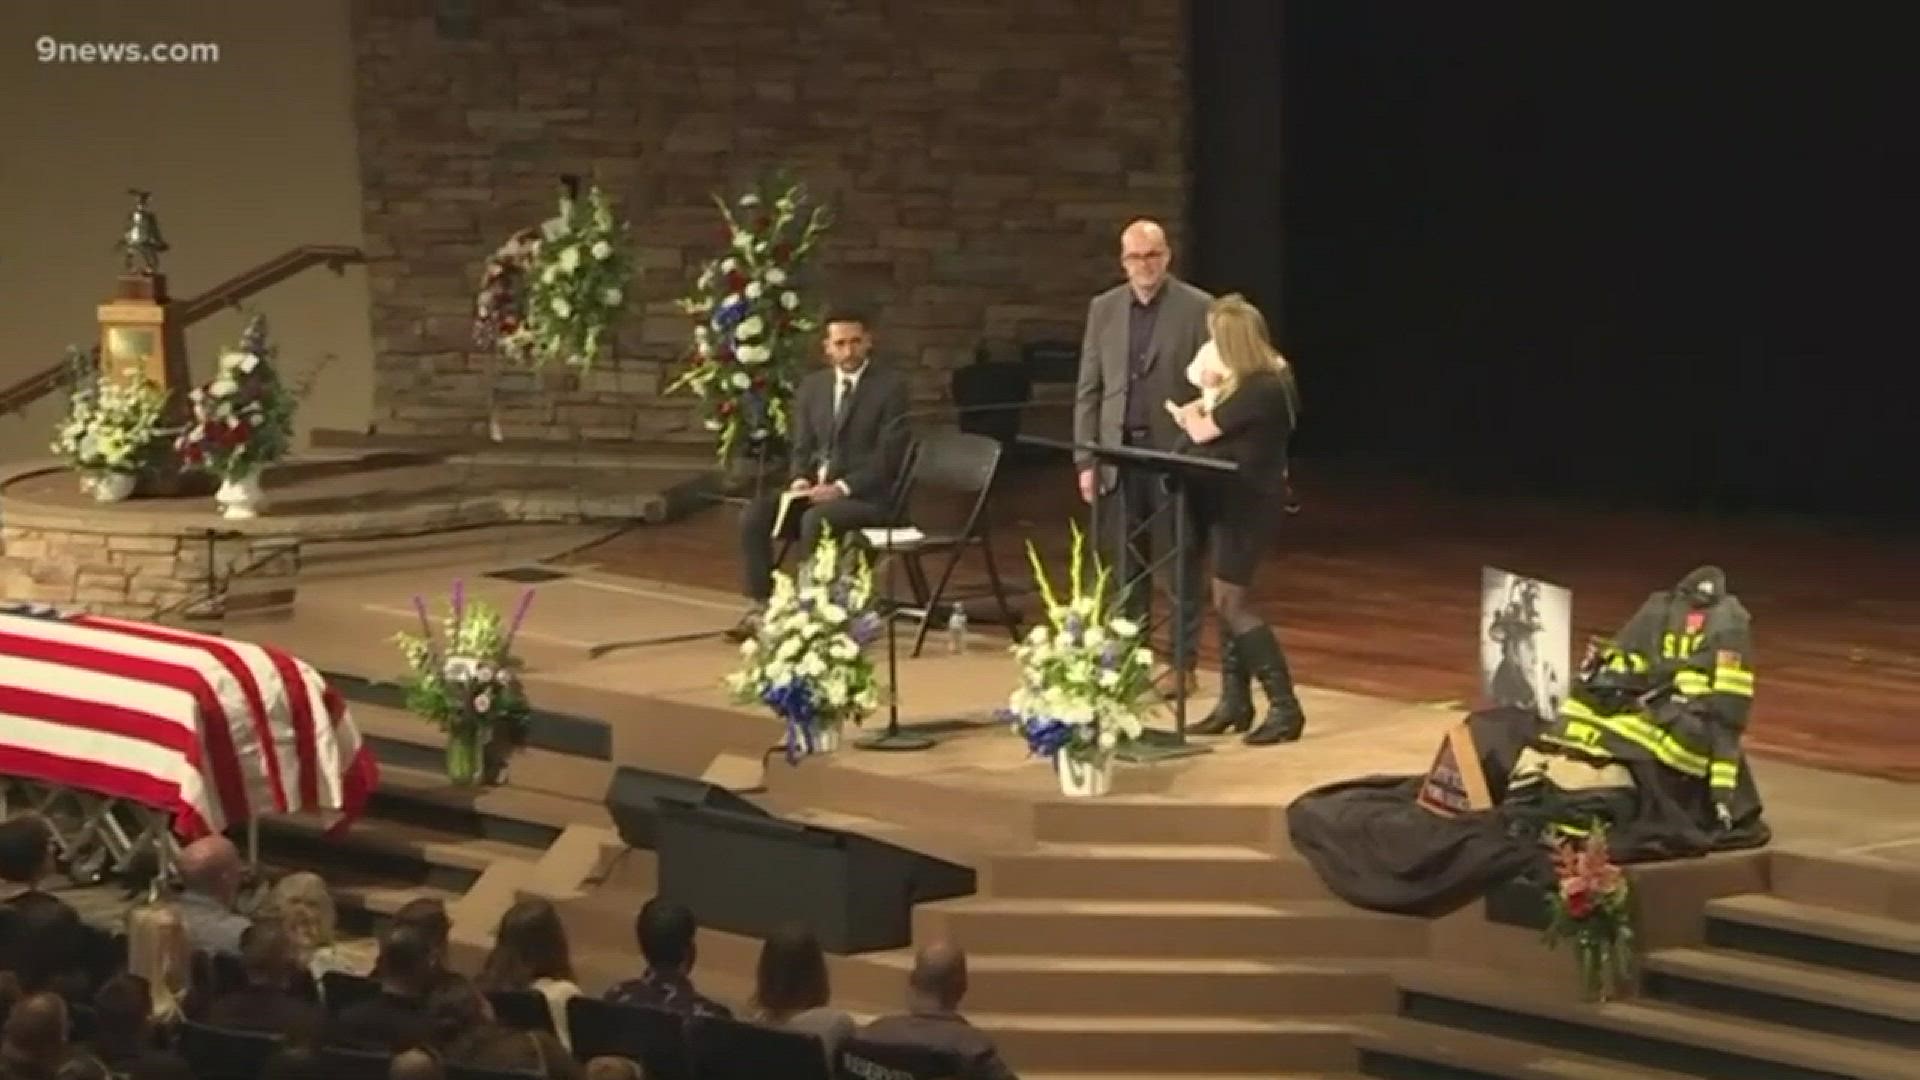 The pregnant wife of fallen South Metro Firefighter Cody Mooney spoke at his funeral Friday afternoon following his death from an aggressive brain tumor. She remembered her husband as a devout Christian who forged meaningful relationships. His favorite quote to tell his four children was "love you, miss you, kiss you," and Emily Mooney said she'll now be telling Cody "Love you, miss you, and wish that we could kiss you."